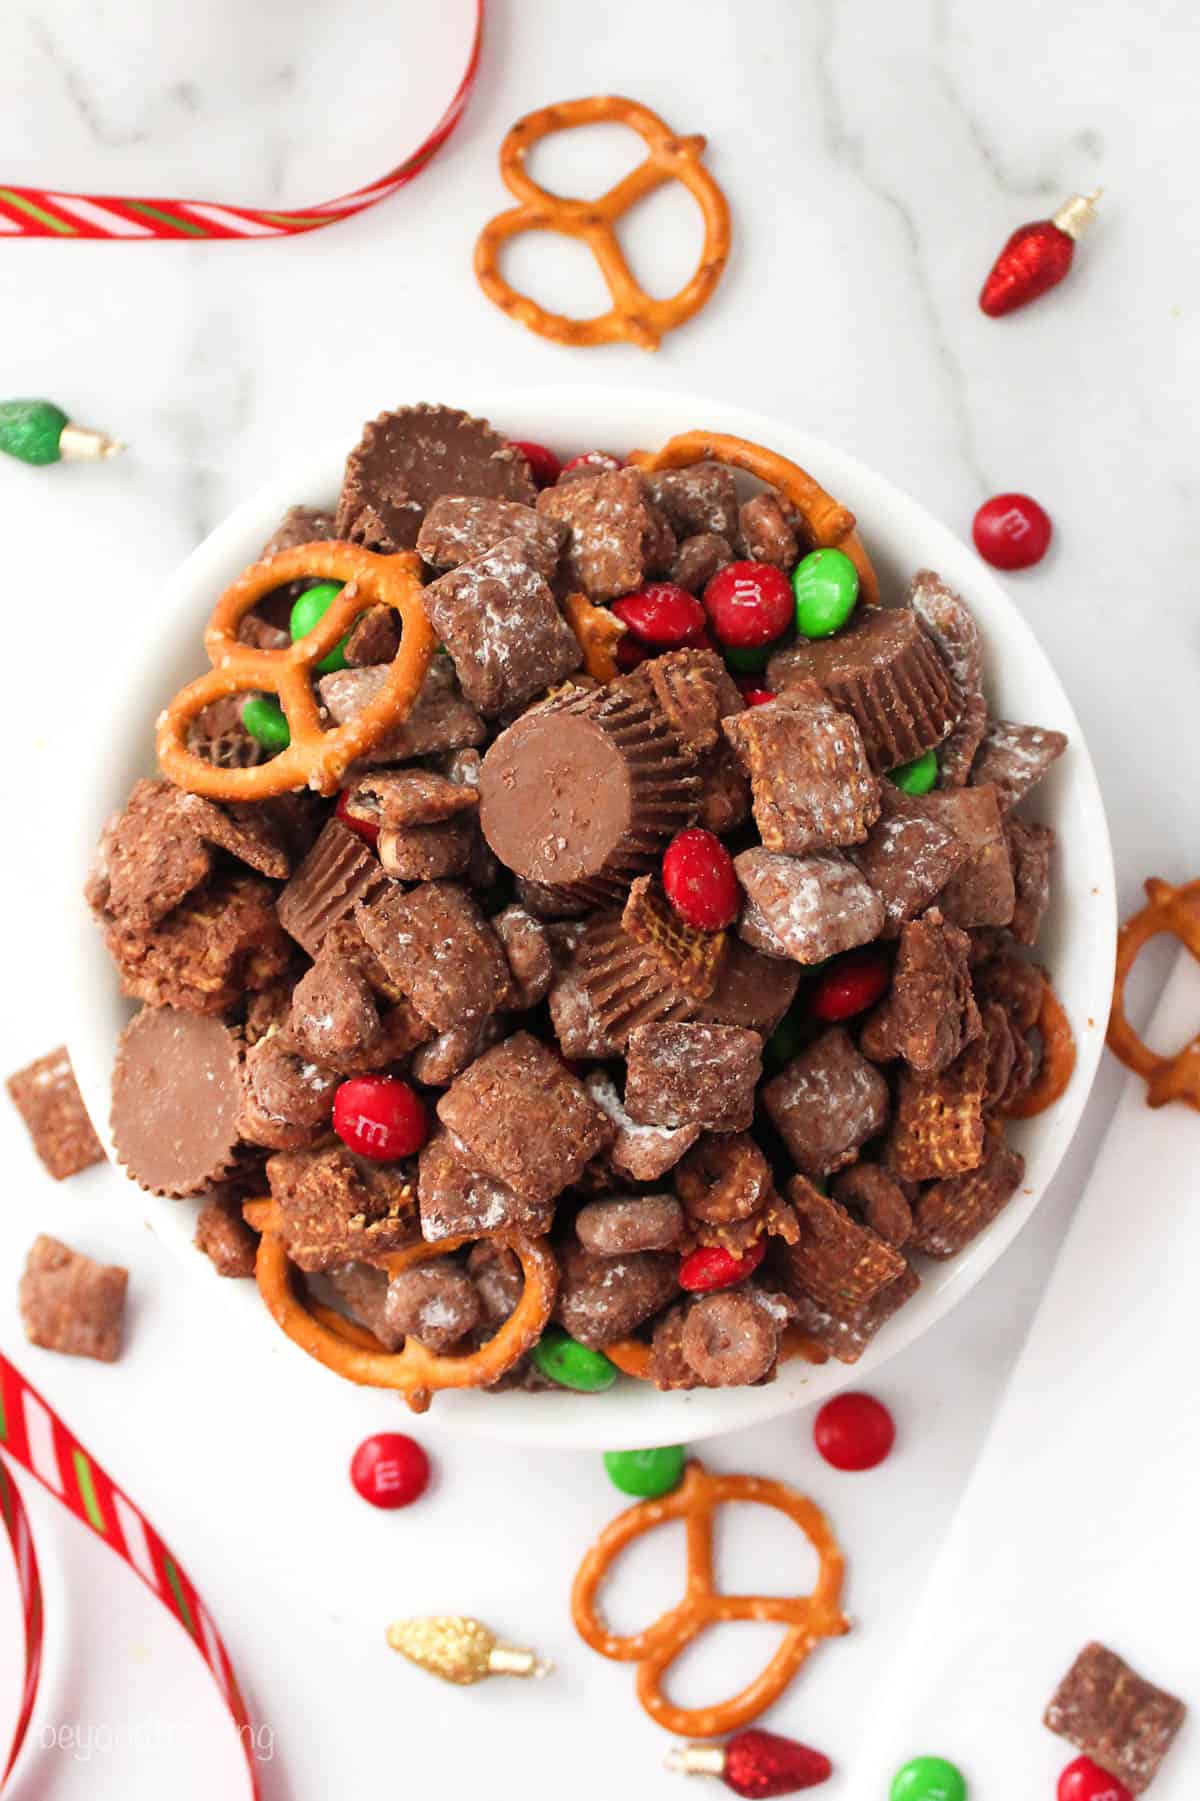 a white bowl fill with Christmas snack mix like pretzels, Reese's peanut butter cups and pretzels